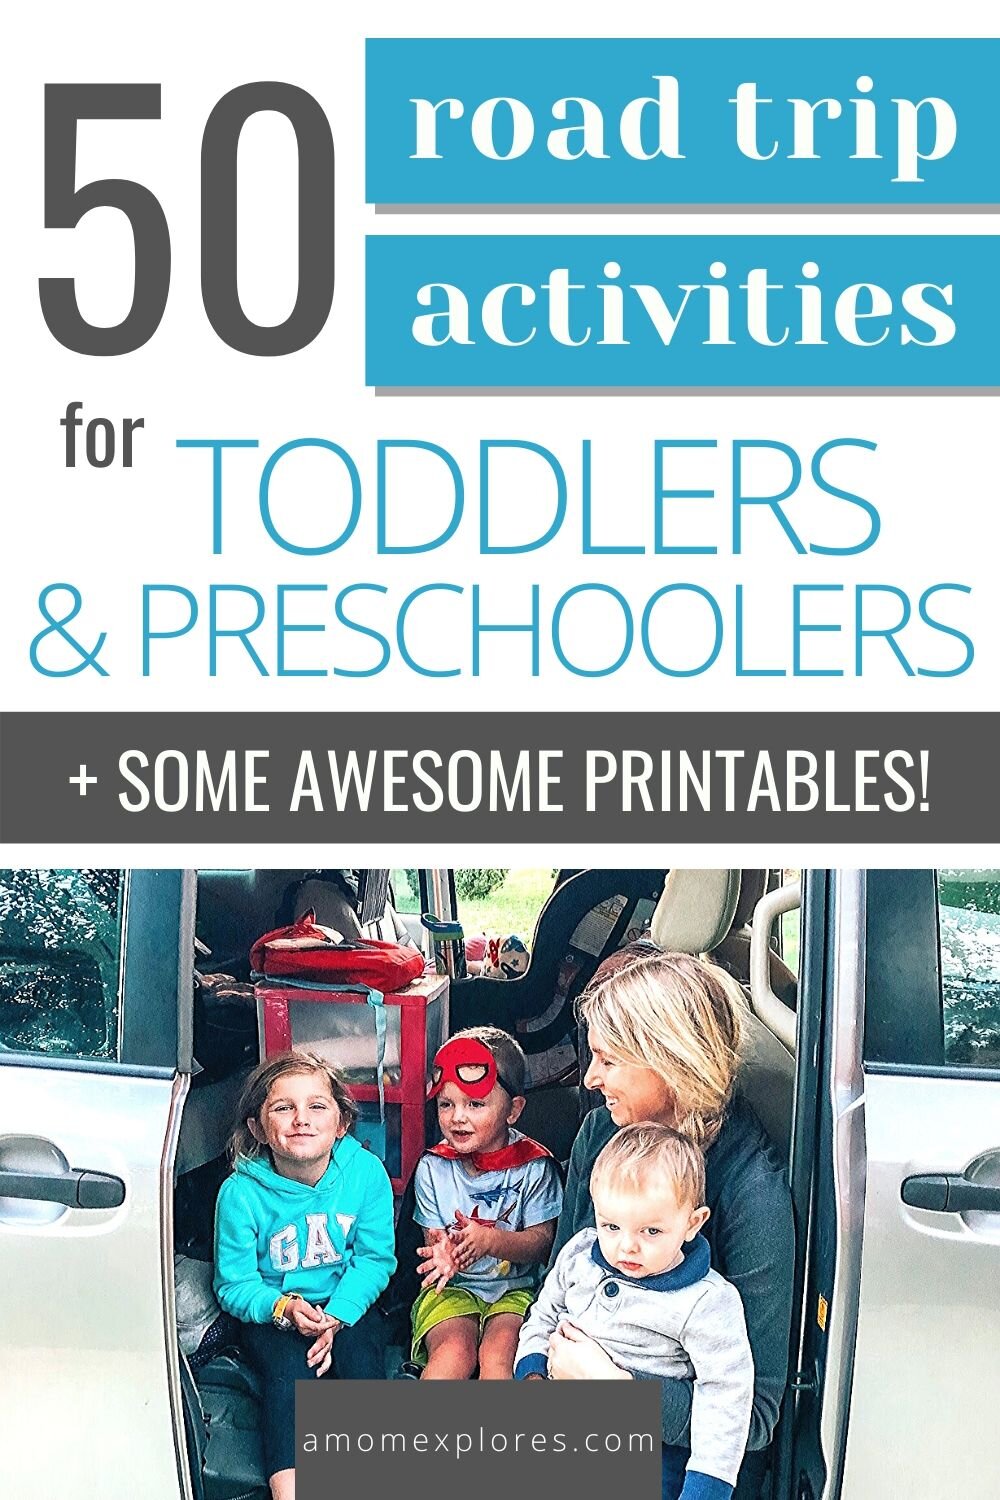 road trip activities for 15 month old